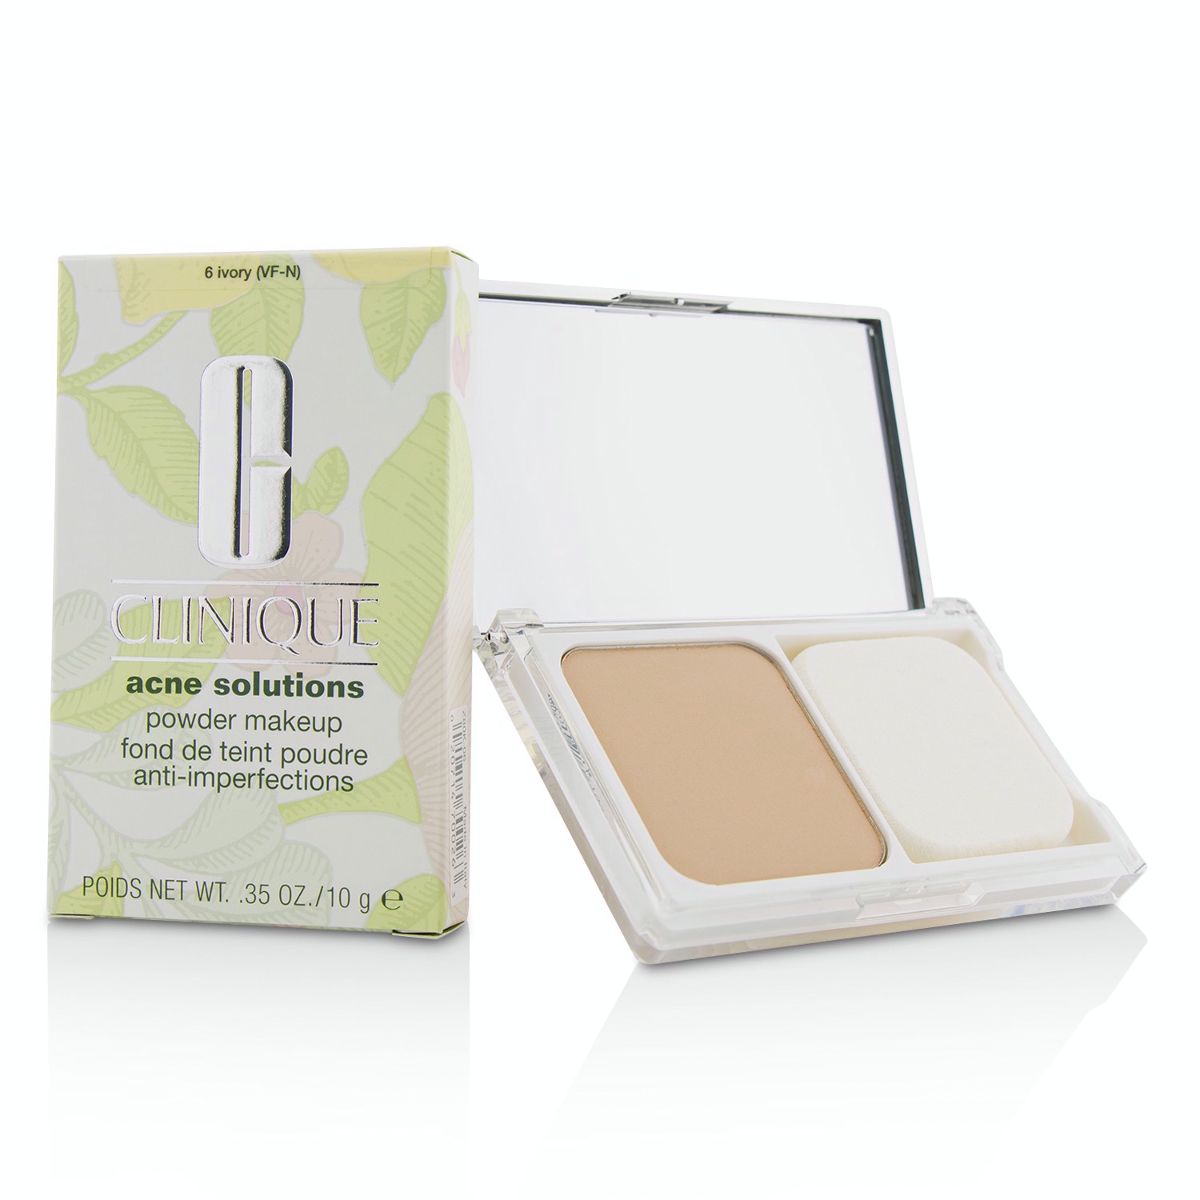 Acne Solutions Powder Makeup - # 06 Ivory (VF-N) Clinique Image